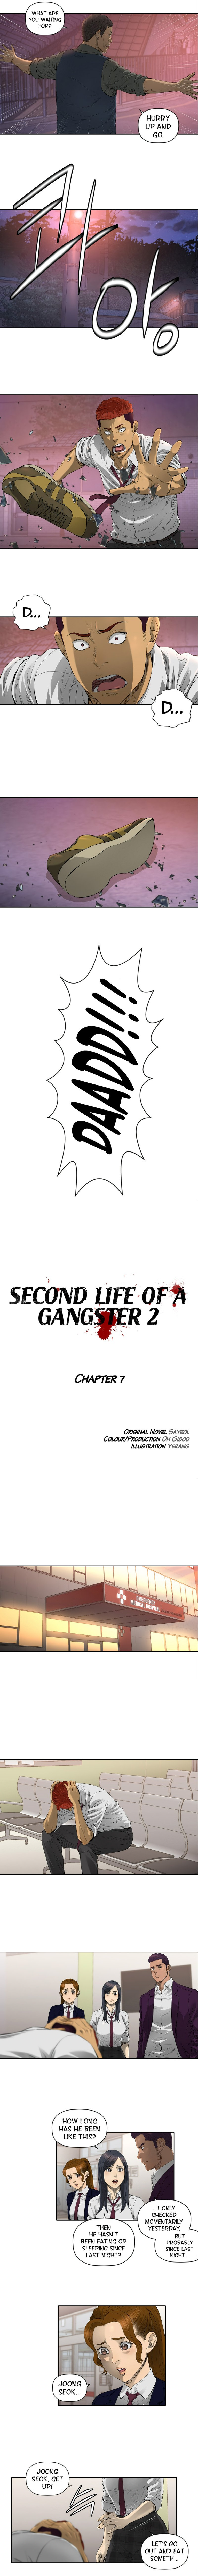 second-life-of-a-gangster-chap-59-2